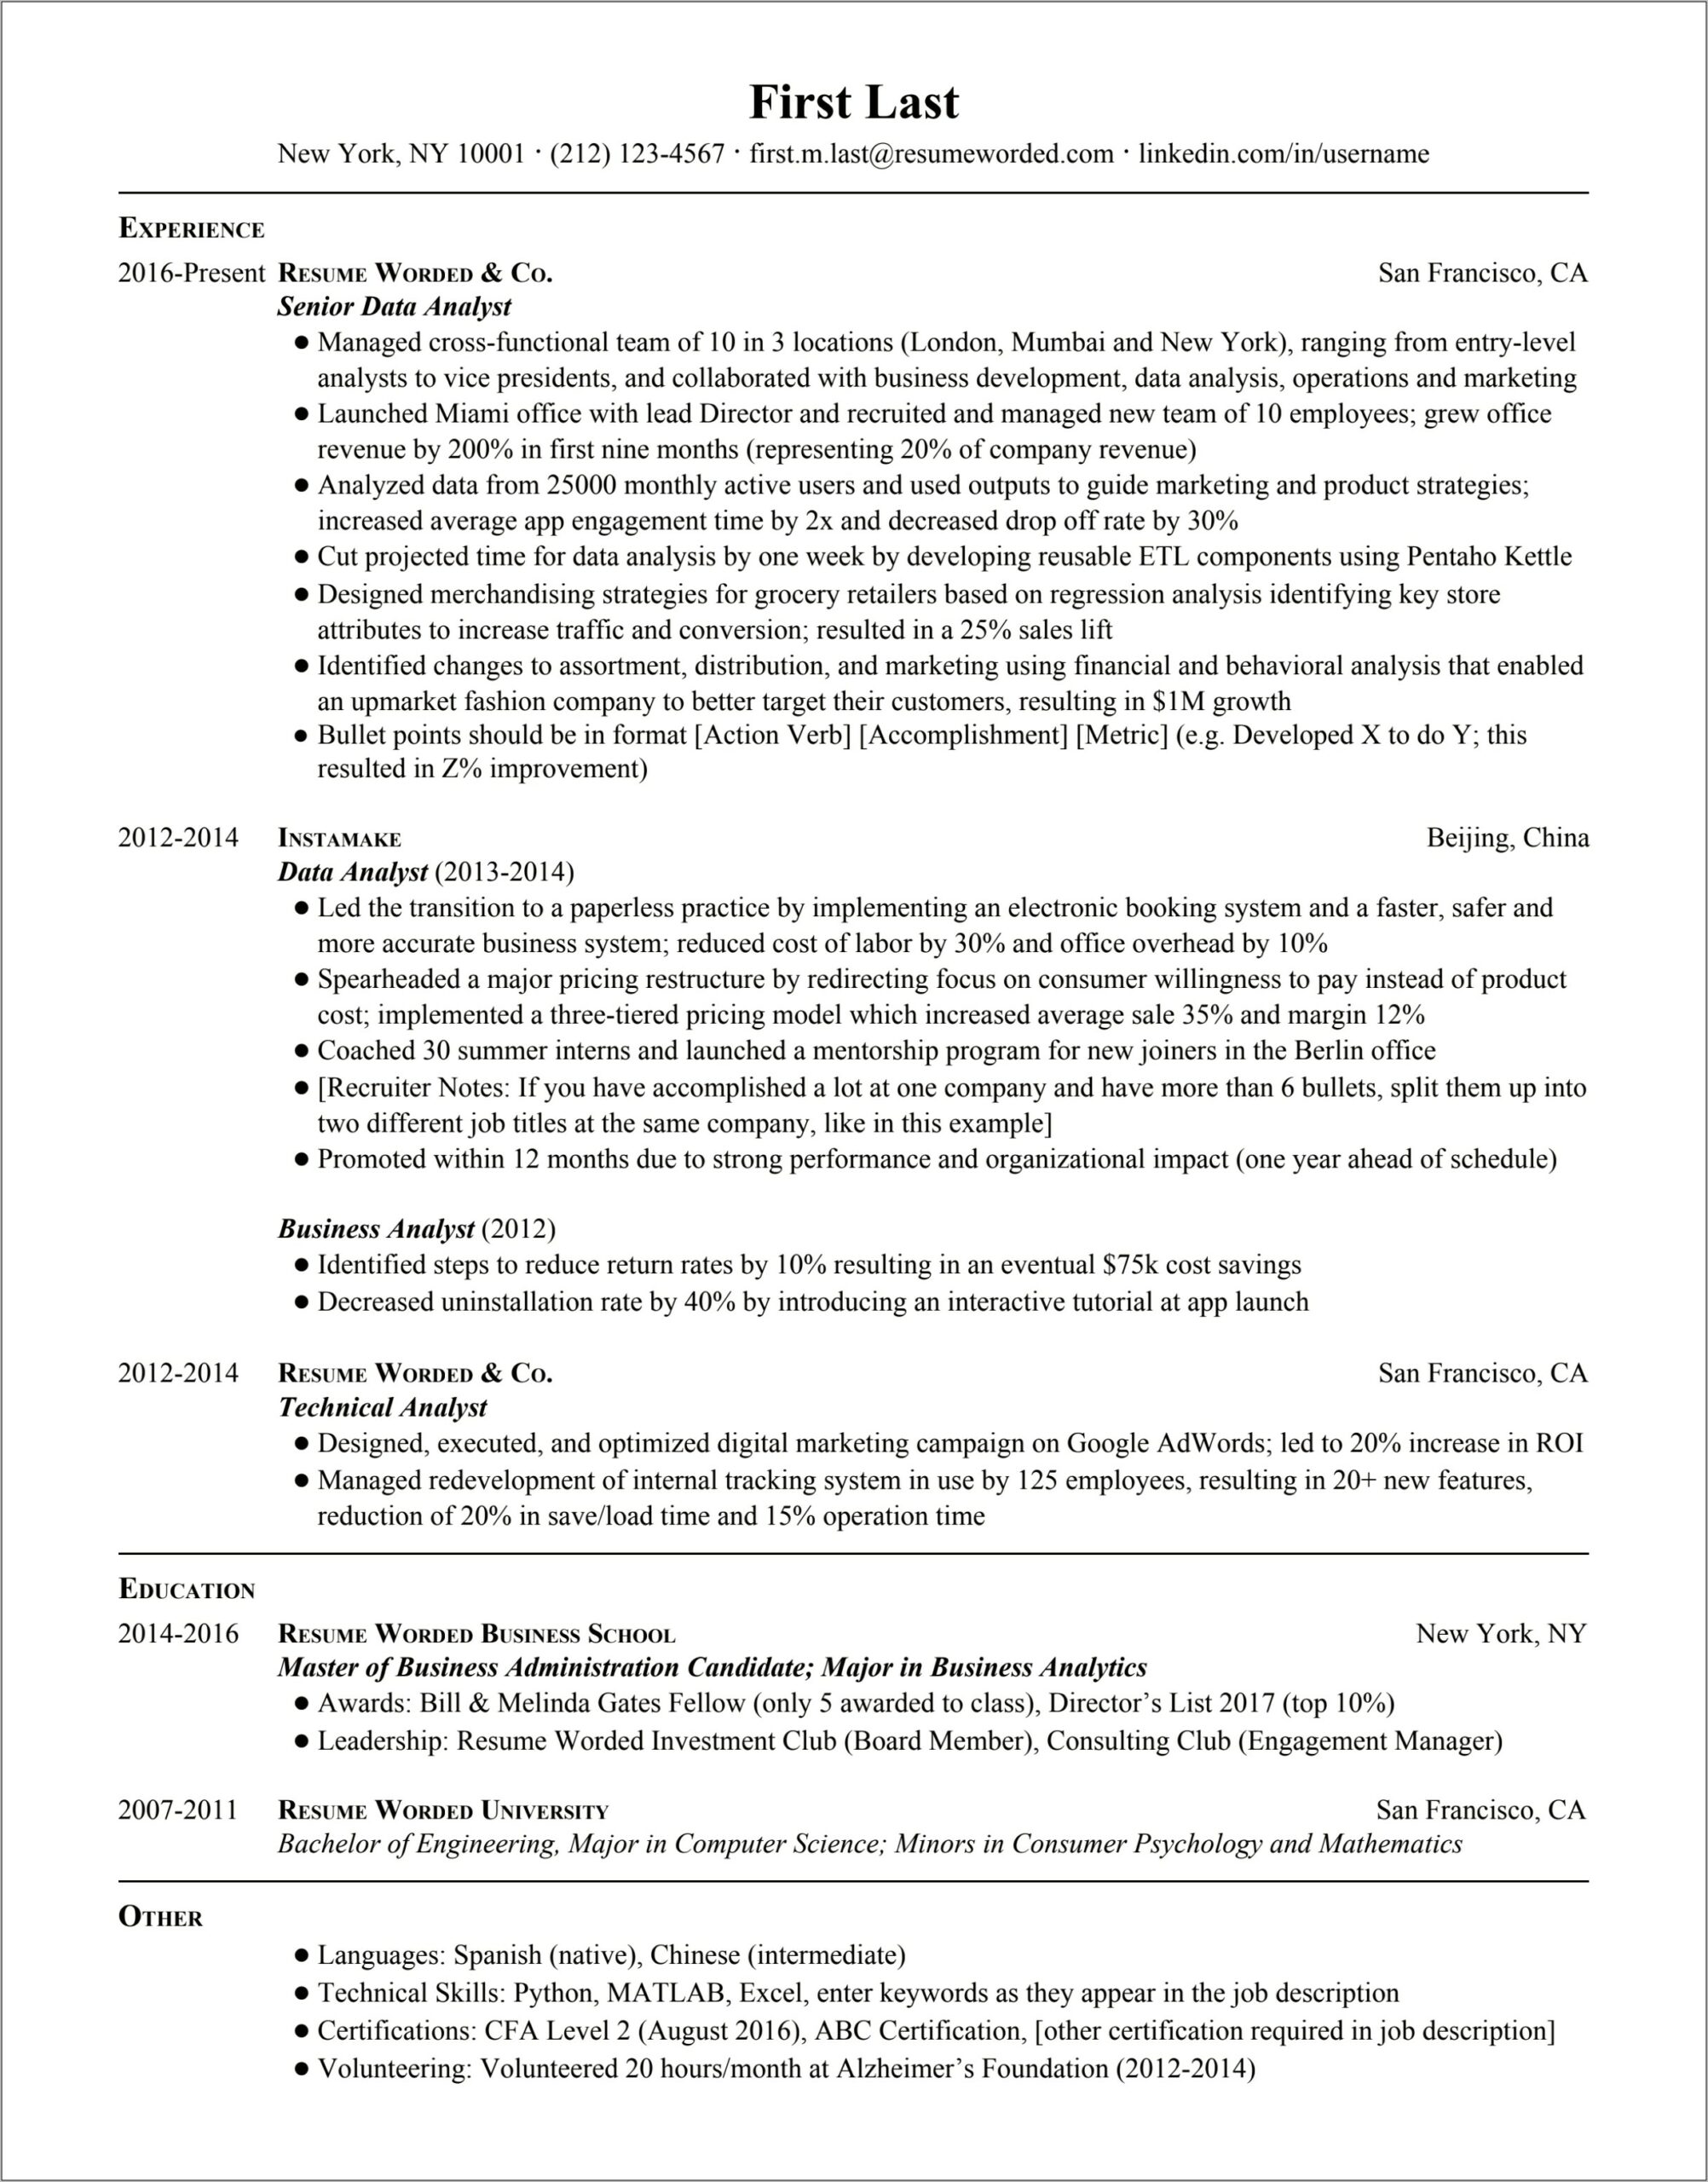 Senior Technical Applications Analyst Resume Examples Achievements